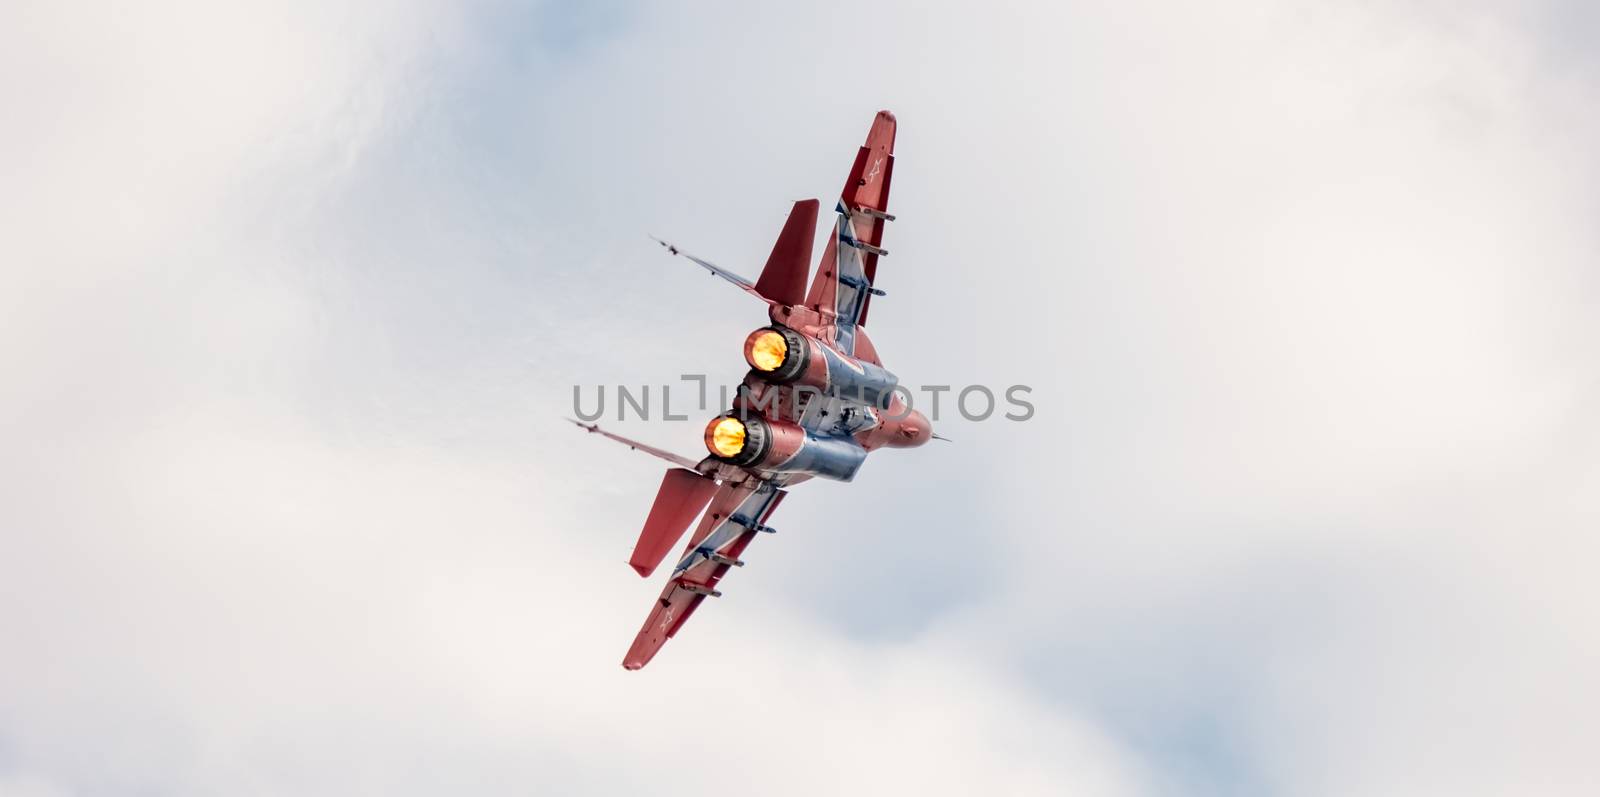 Barnaul, Russia - September 19, 2020: A close-up shot of Strizhi MiG-29 fighter jet performing stunts during an aeroshow. White cloudy sky as a background.